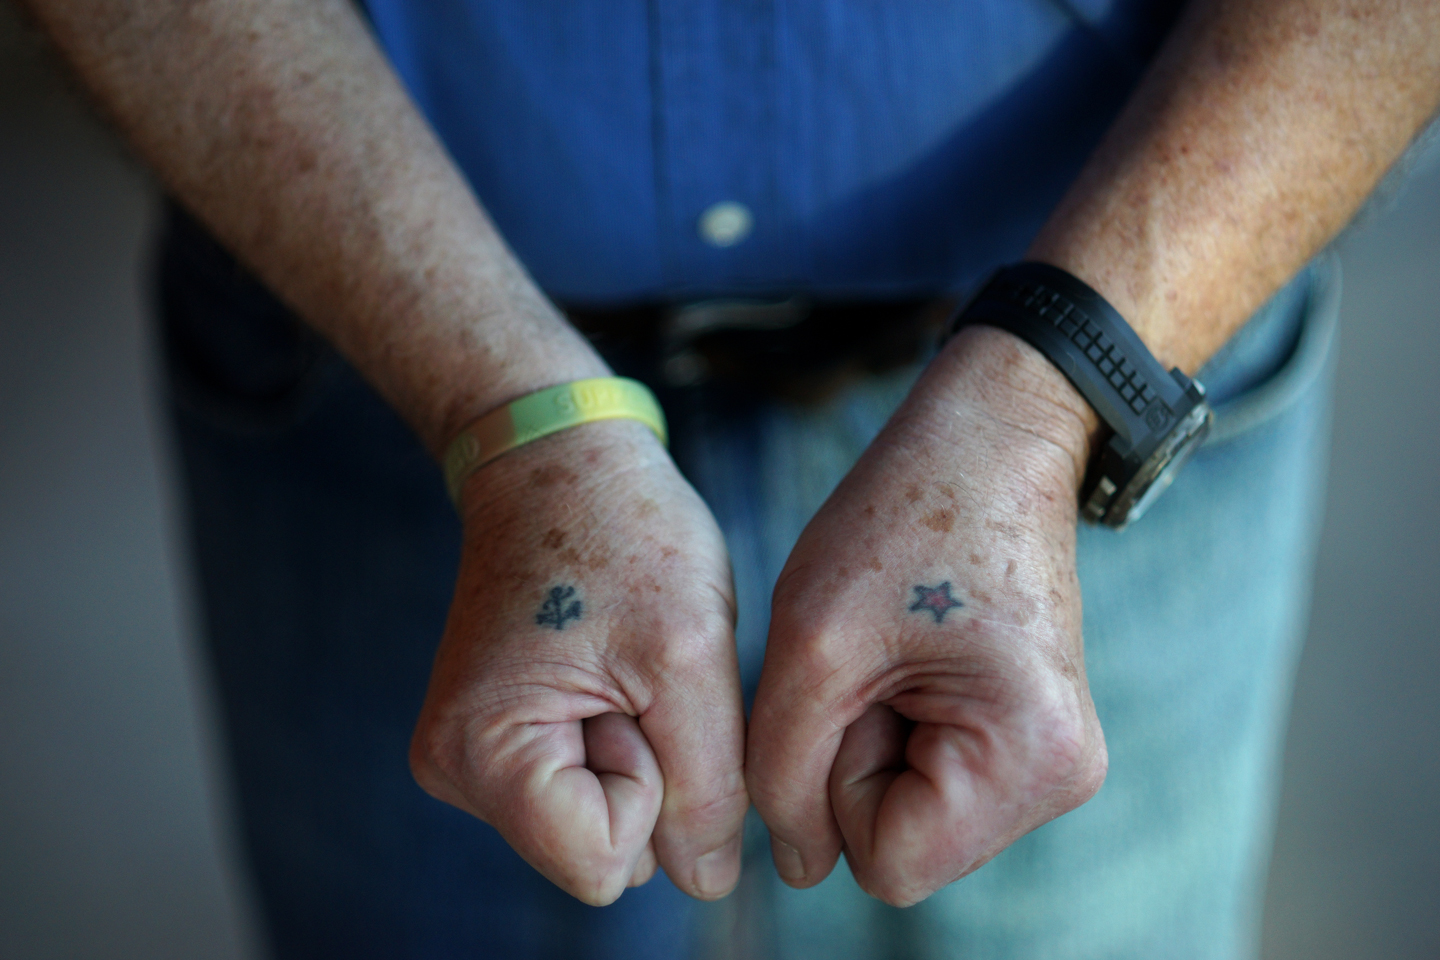 Inked-up Veterans Tell Stories of War Through Their Tattoos | KQED